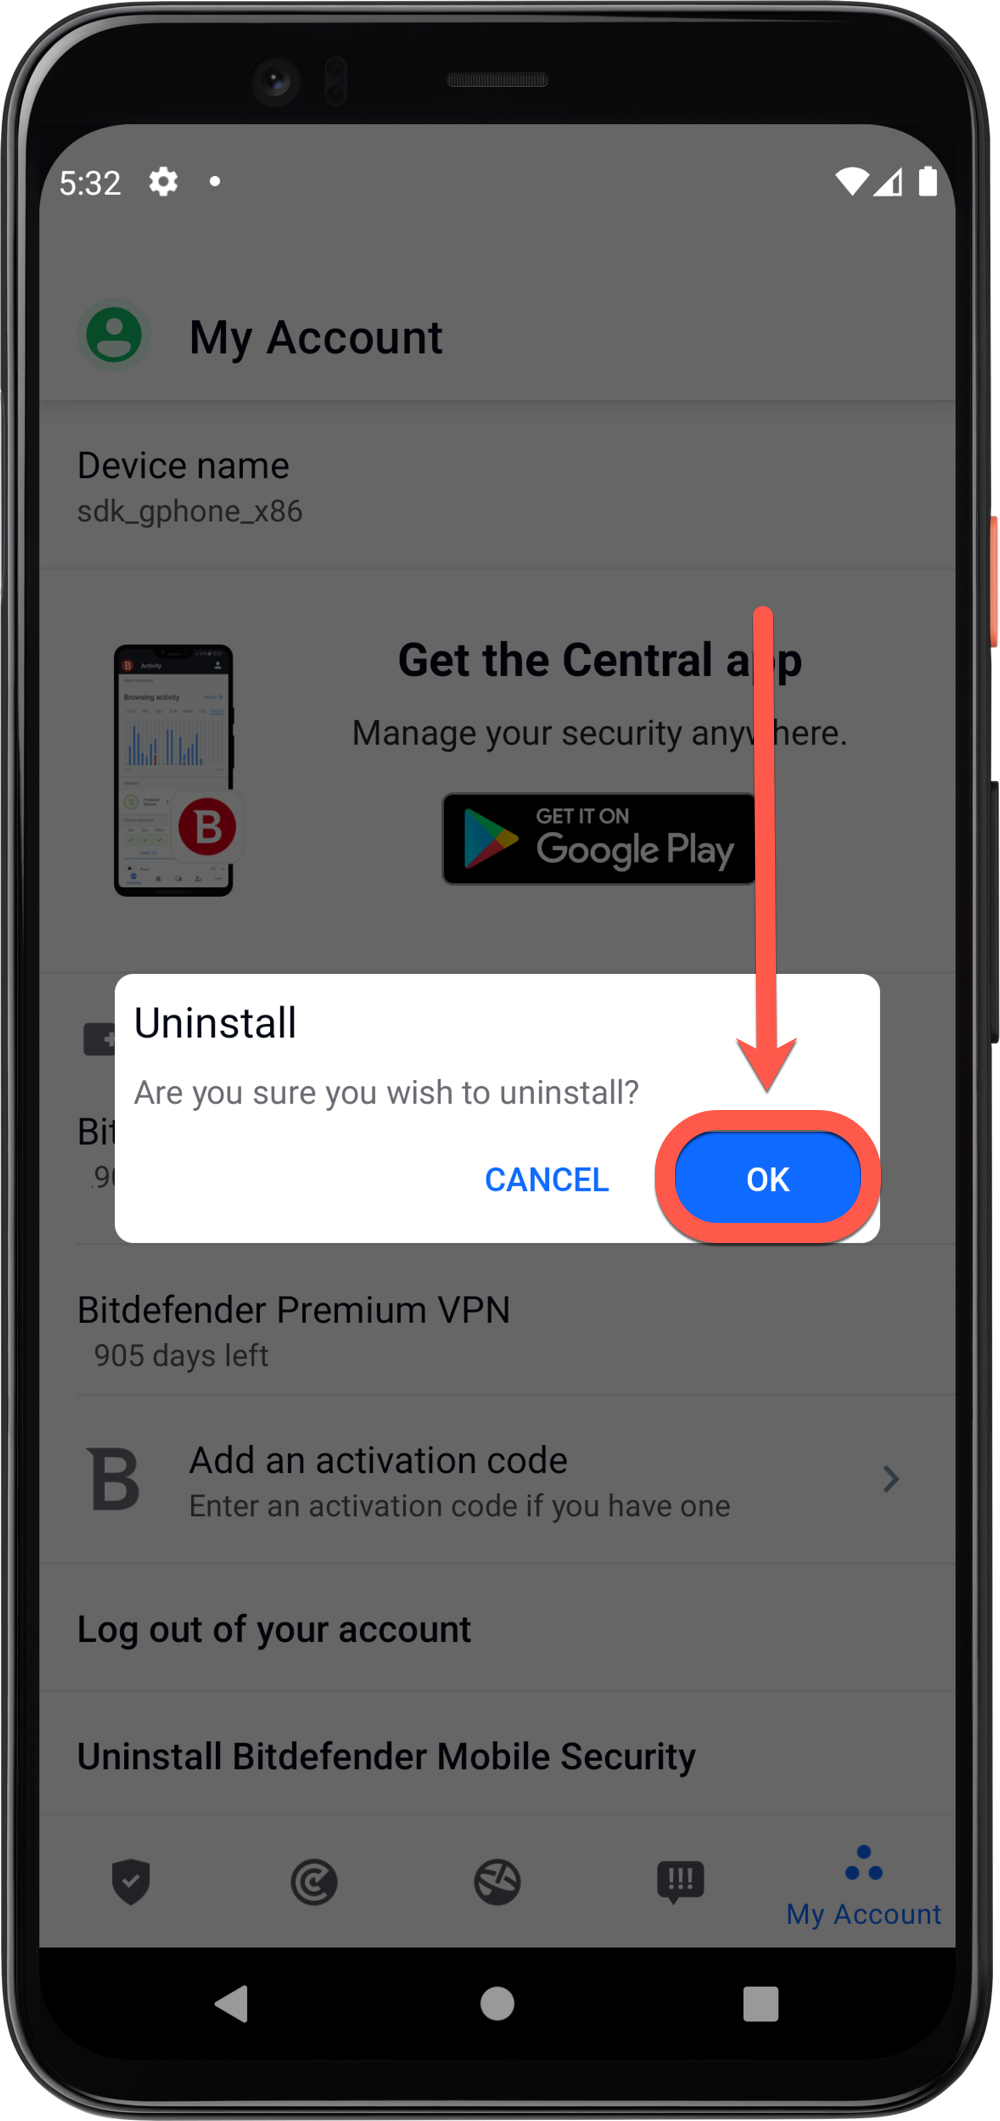 Press OK to uninstall Bitdefender for Android